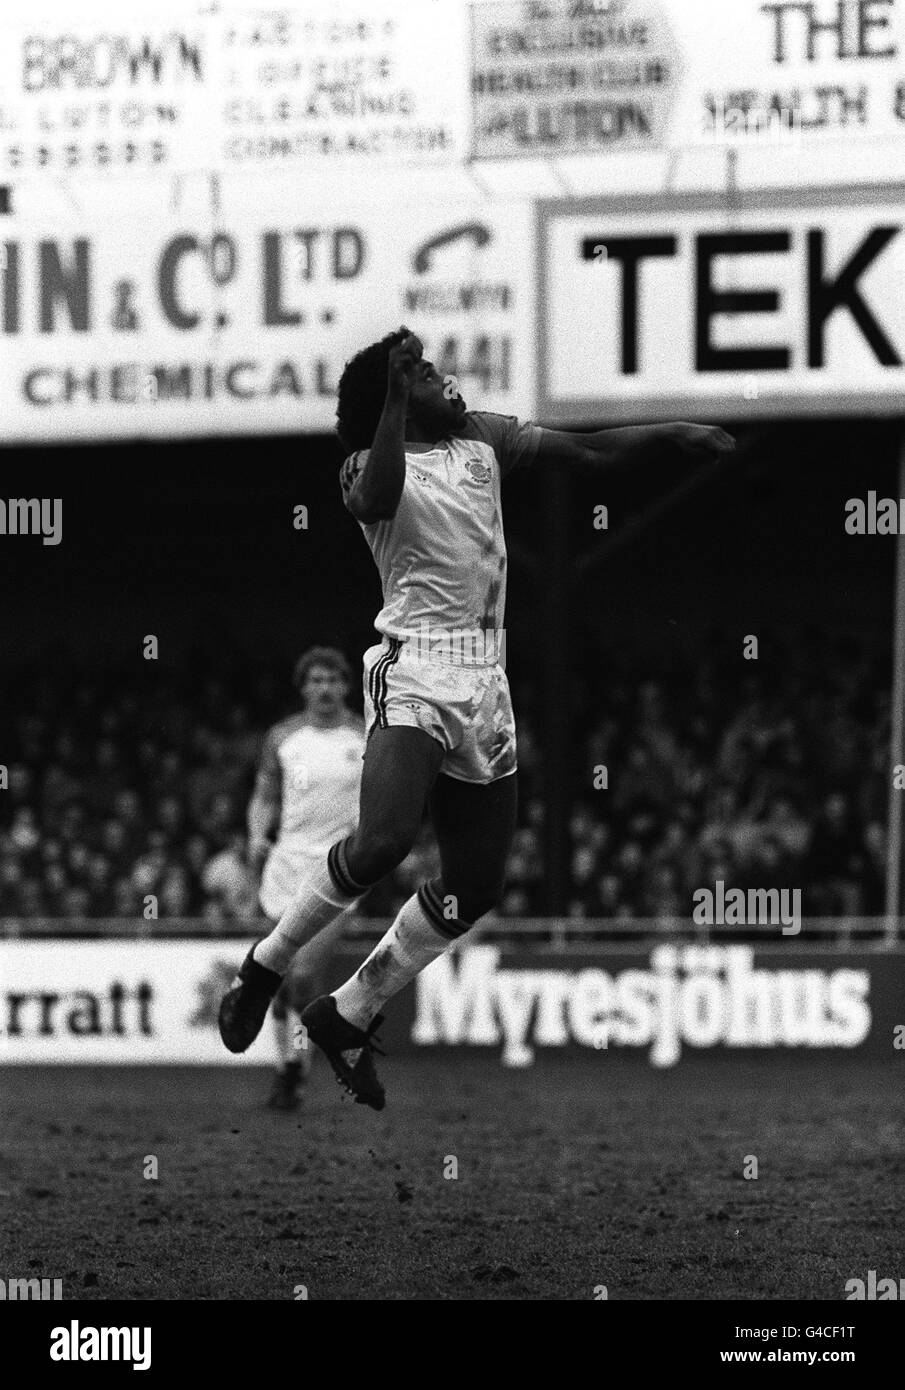 PA NEWS PHOTO 24/11/83 LONDON BORN MIDFIELDER RICKY HILL OF LUTON TWON F.C. IN ACTION Stock Photo